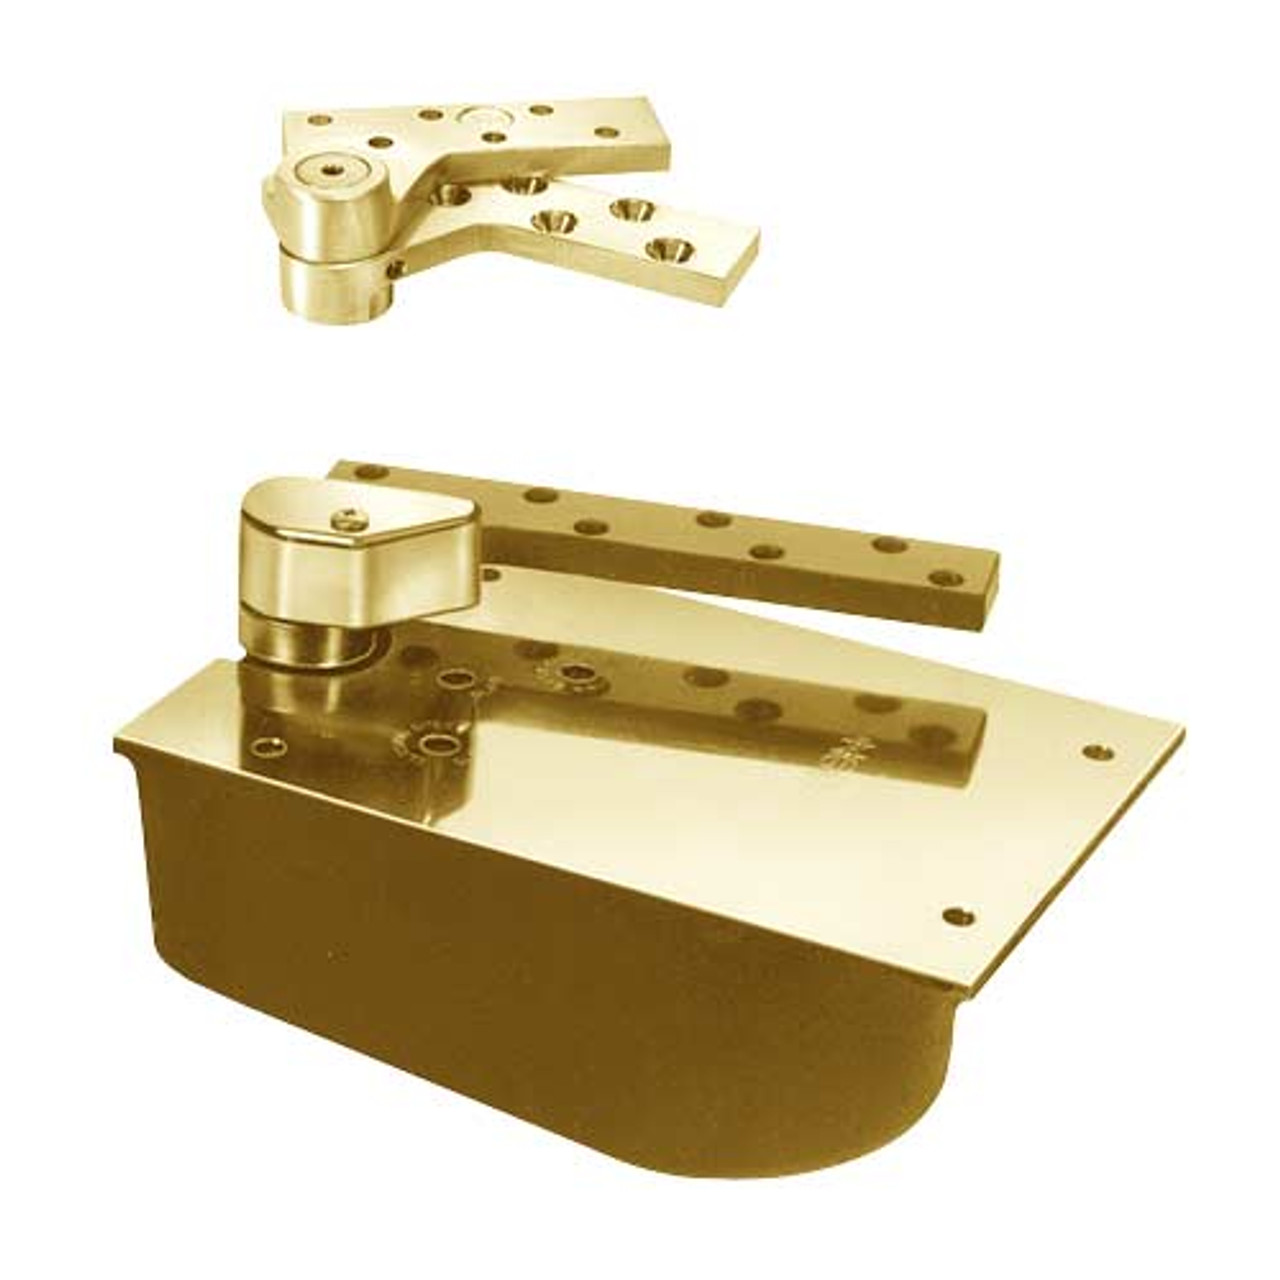 L27-95S-CWF-LH-2-605 Rixson 27 Series Extra Heavy Duty Lead Lined Offset Floor Closer in Bright Brass Finish